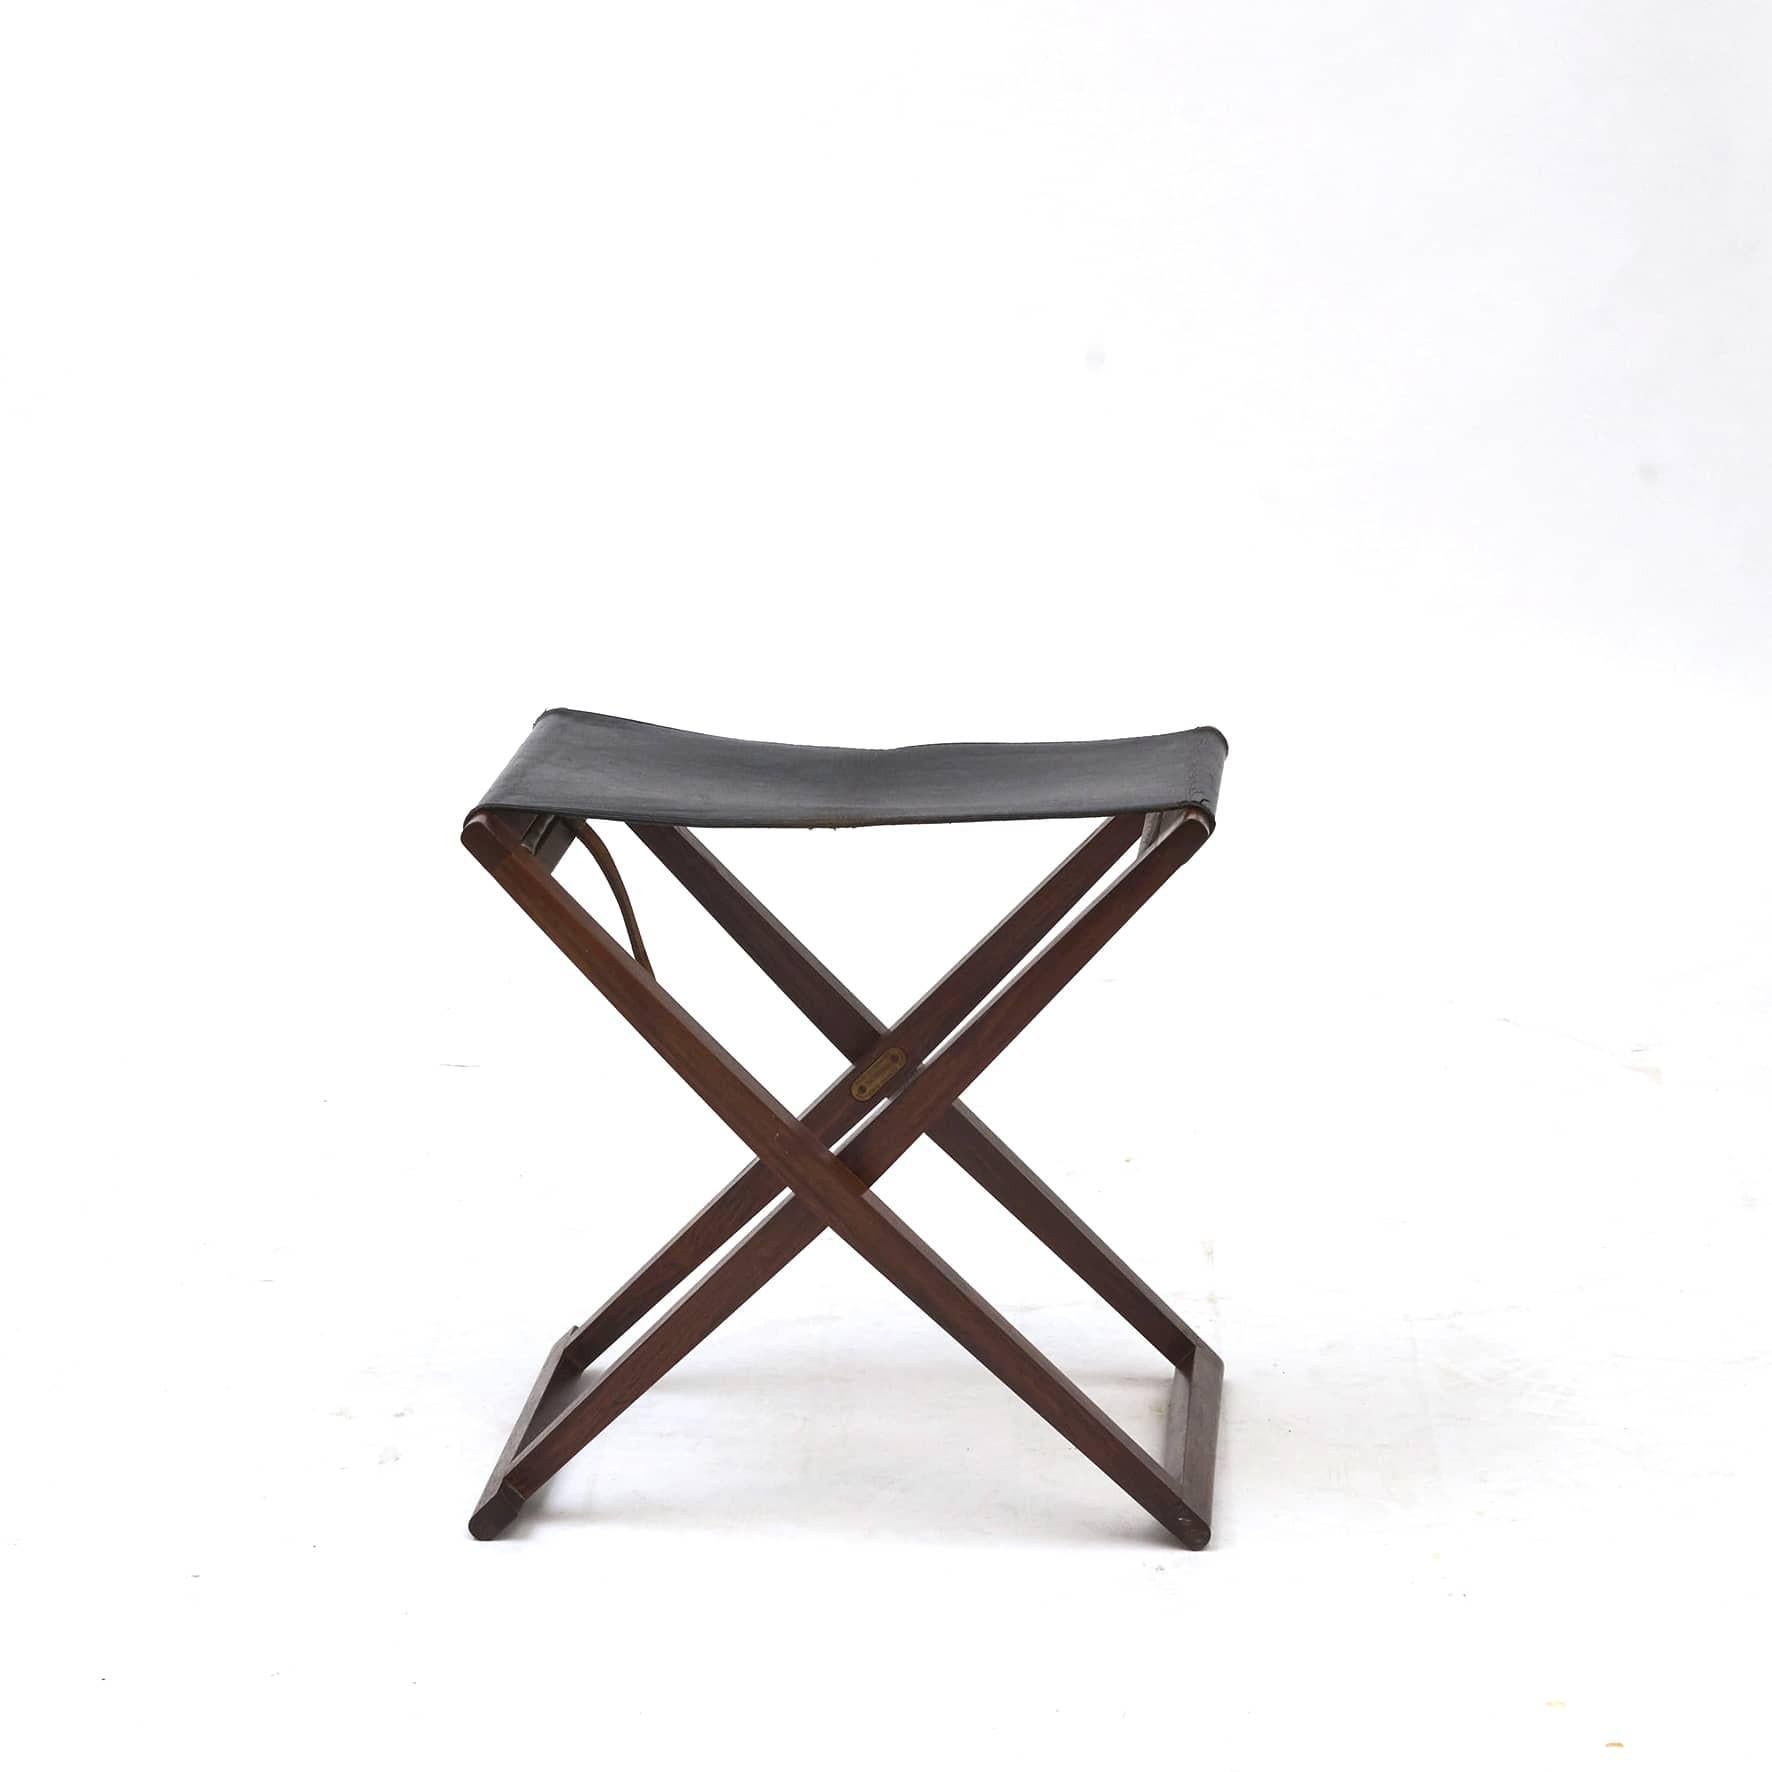 Mogens Koch 1898-1992.
A foldable stool, model No. MK-30, by Danish architect and designer Mogens Koch.
Made of Palisander frame with black leather seating.

Manufactured by Interna, Denmark 1960's.
In untouched and original good condition.